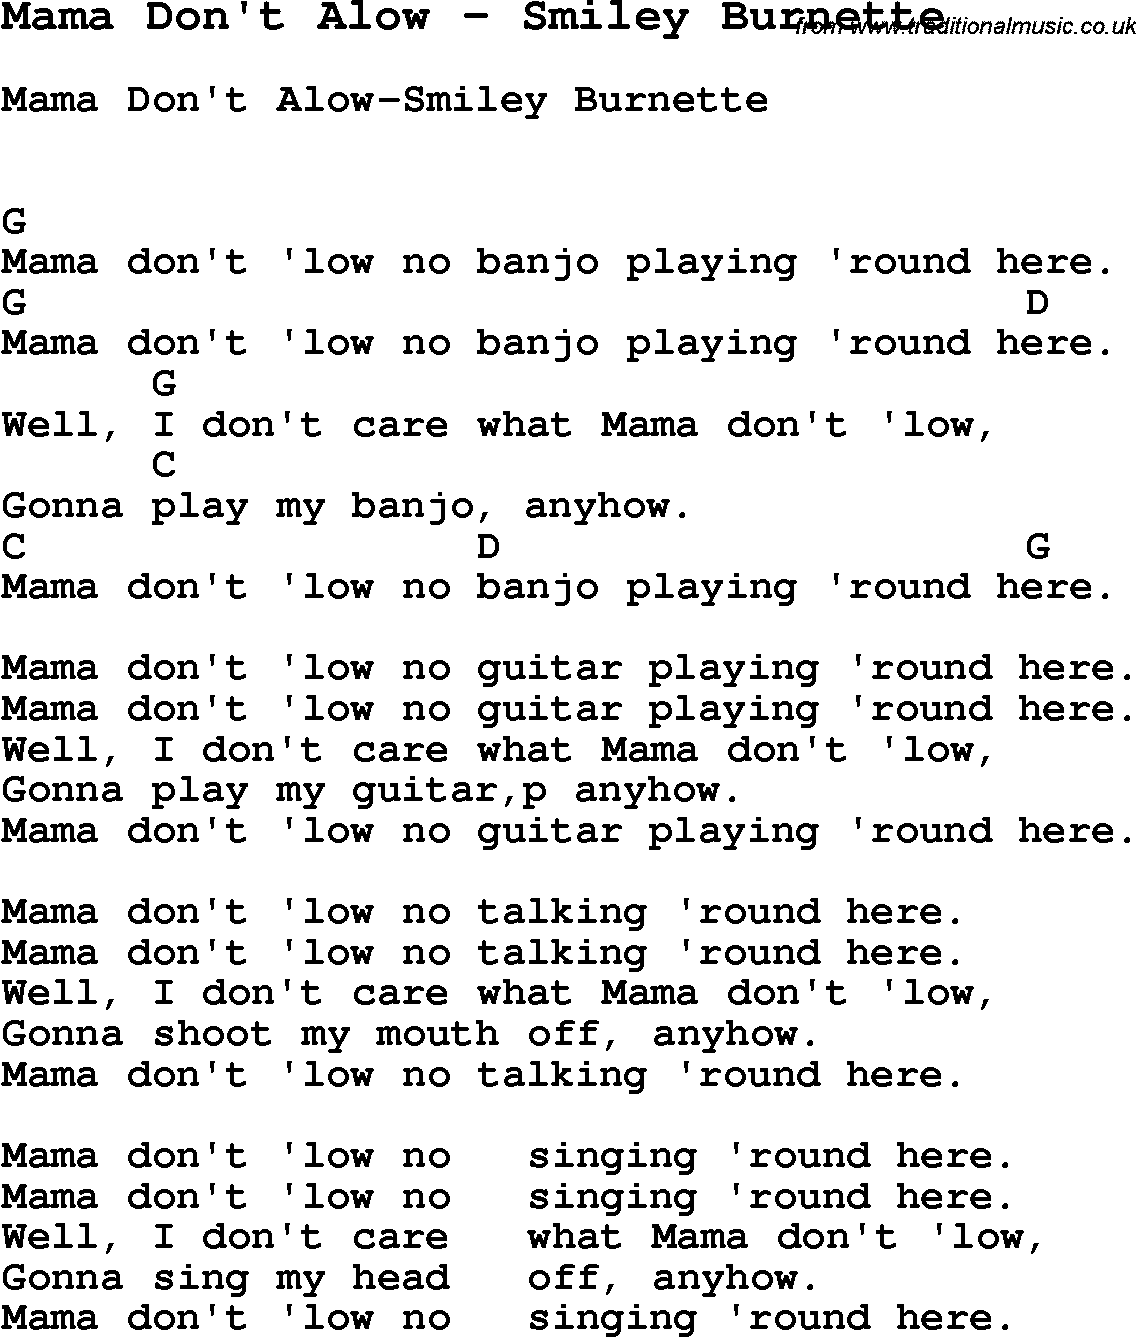 Song Mama Don't Alow by Smiley Burnette, with lyrics for vocal performance and accompaniment chords for Ukulele, Guitar Banjo etc.